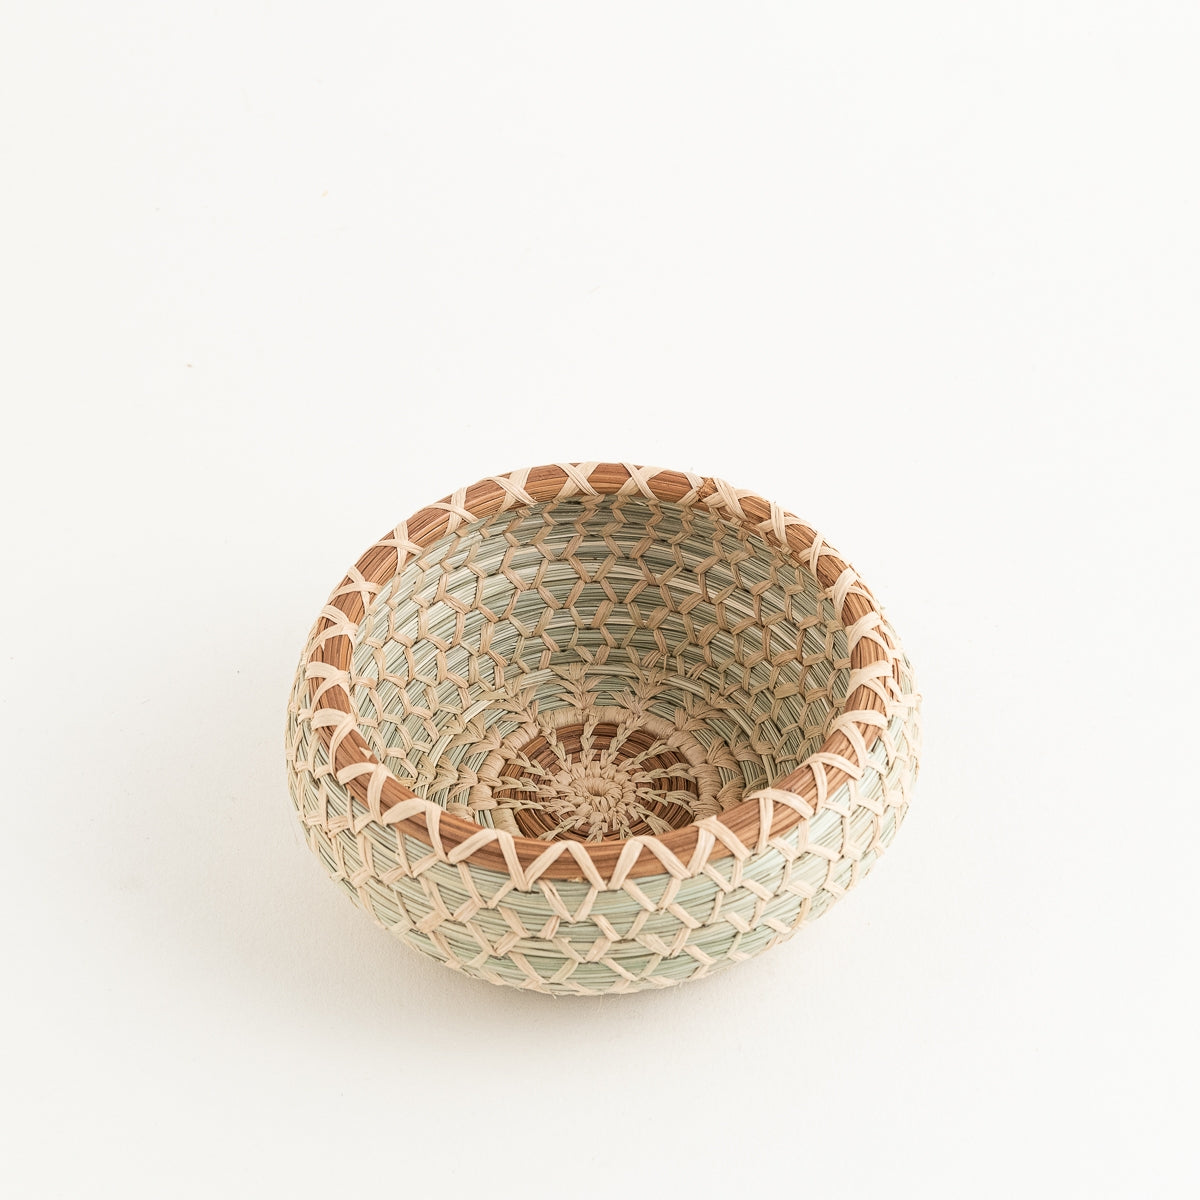 Expertly handwoven of pajón, a native grass in Guatemala and trimmed with a pine needle accent, the Yesica Basket is just the right size to keep your desk or counter organized. Named for Yesica, the artisan partner in Sololá who designed this sweet basket.